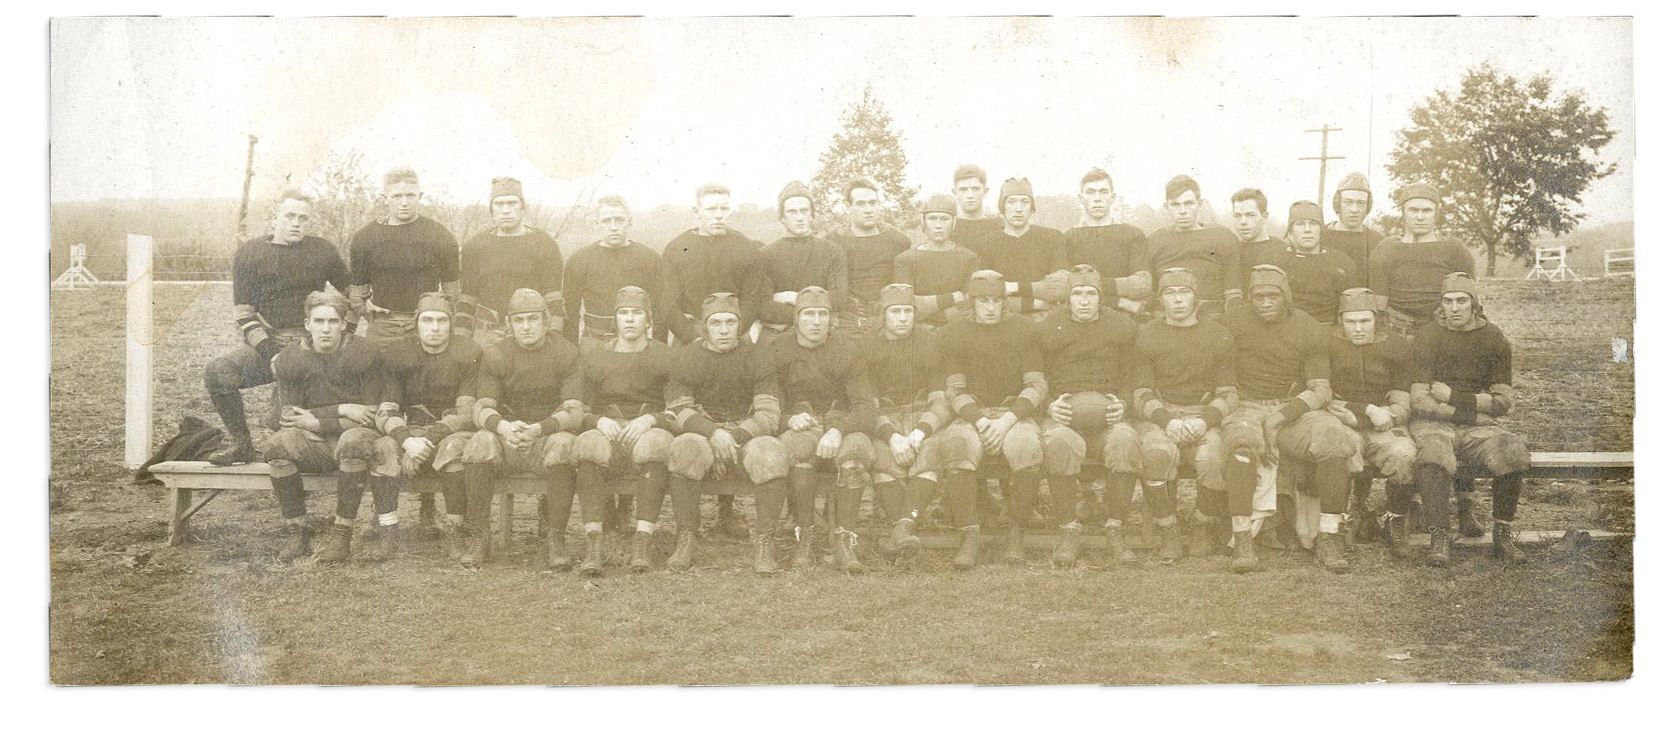 Football - 1917 Rutgers Team Photo with Paul Robeson